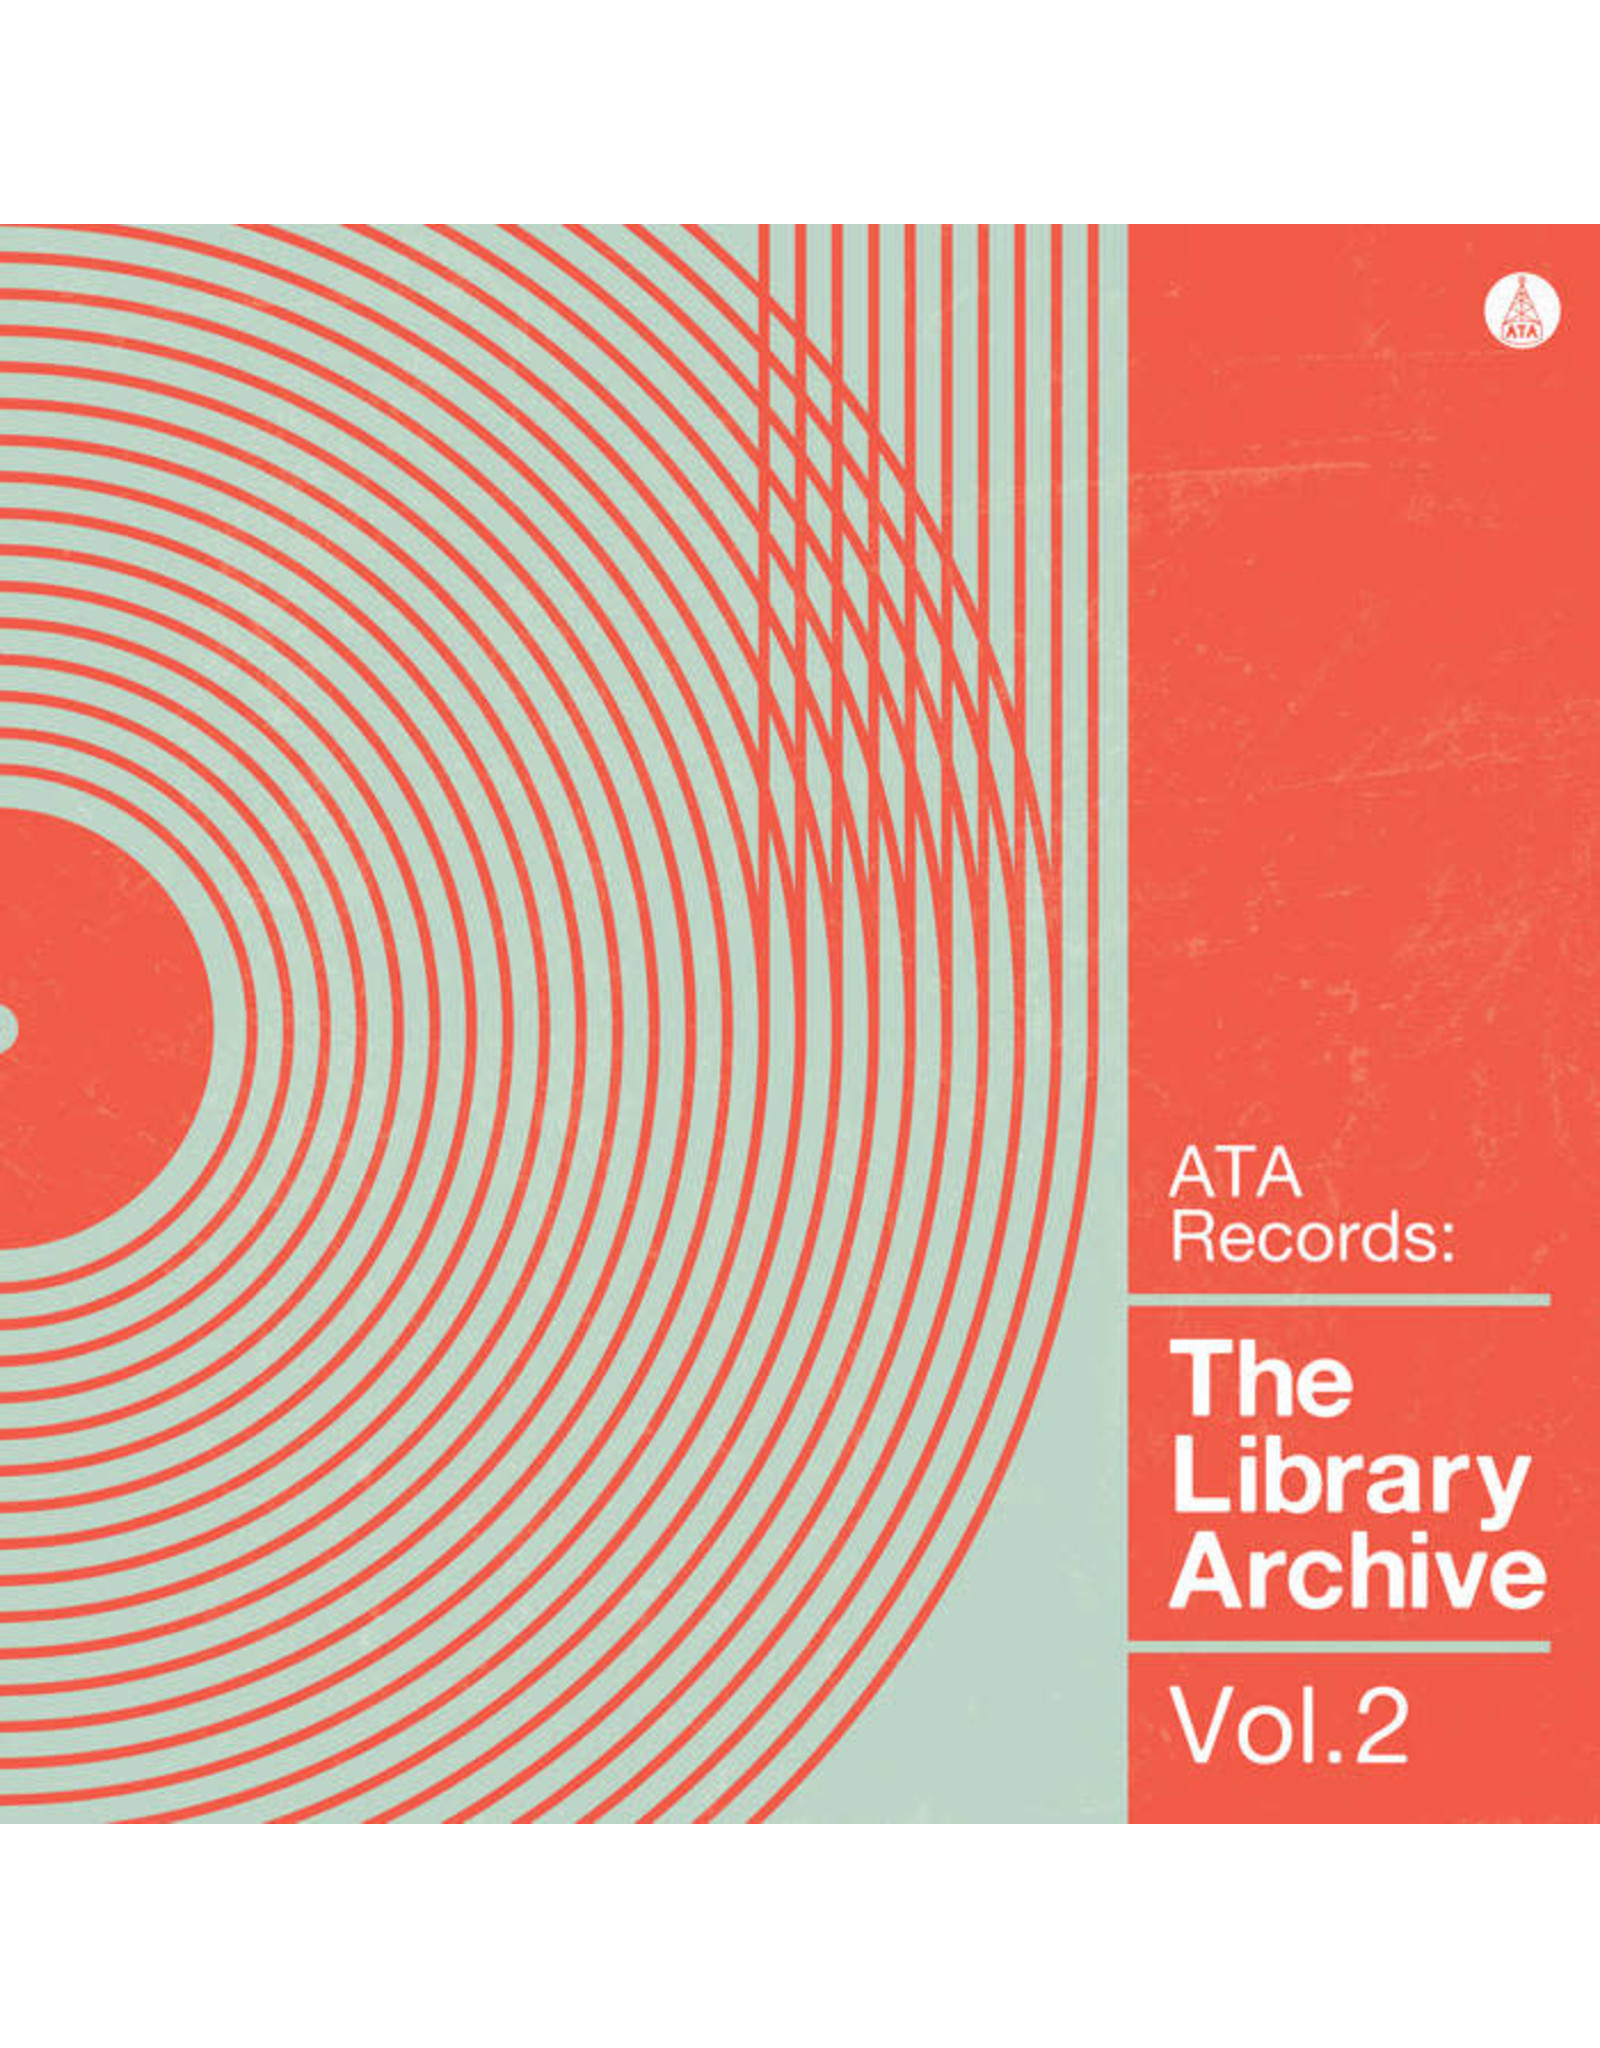 ATA Various: Early Works Vol. 2 - Music from the Archives LP